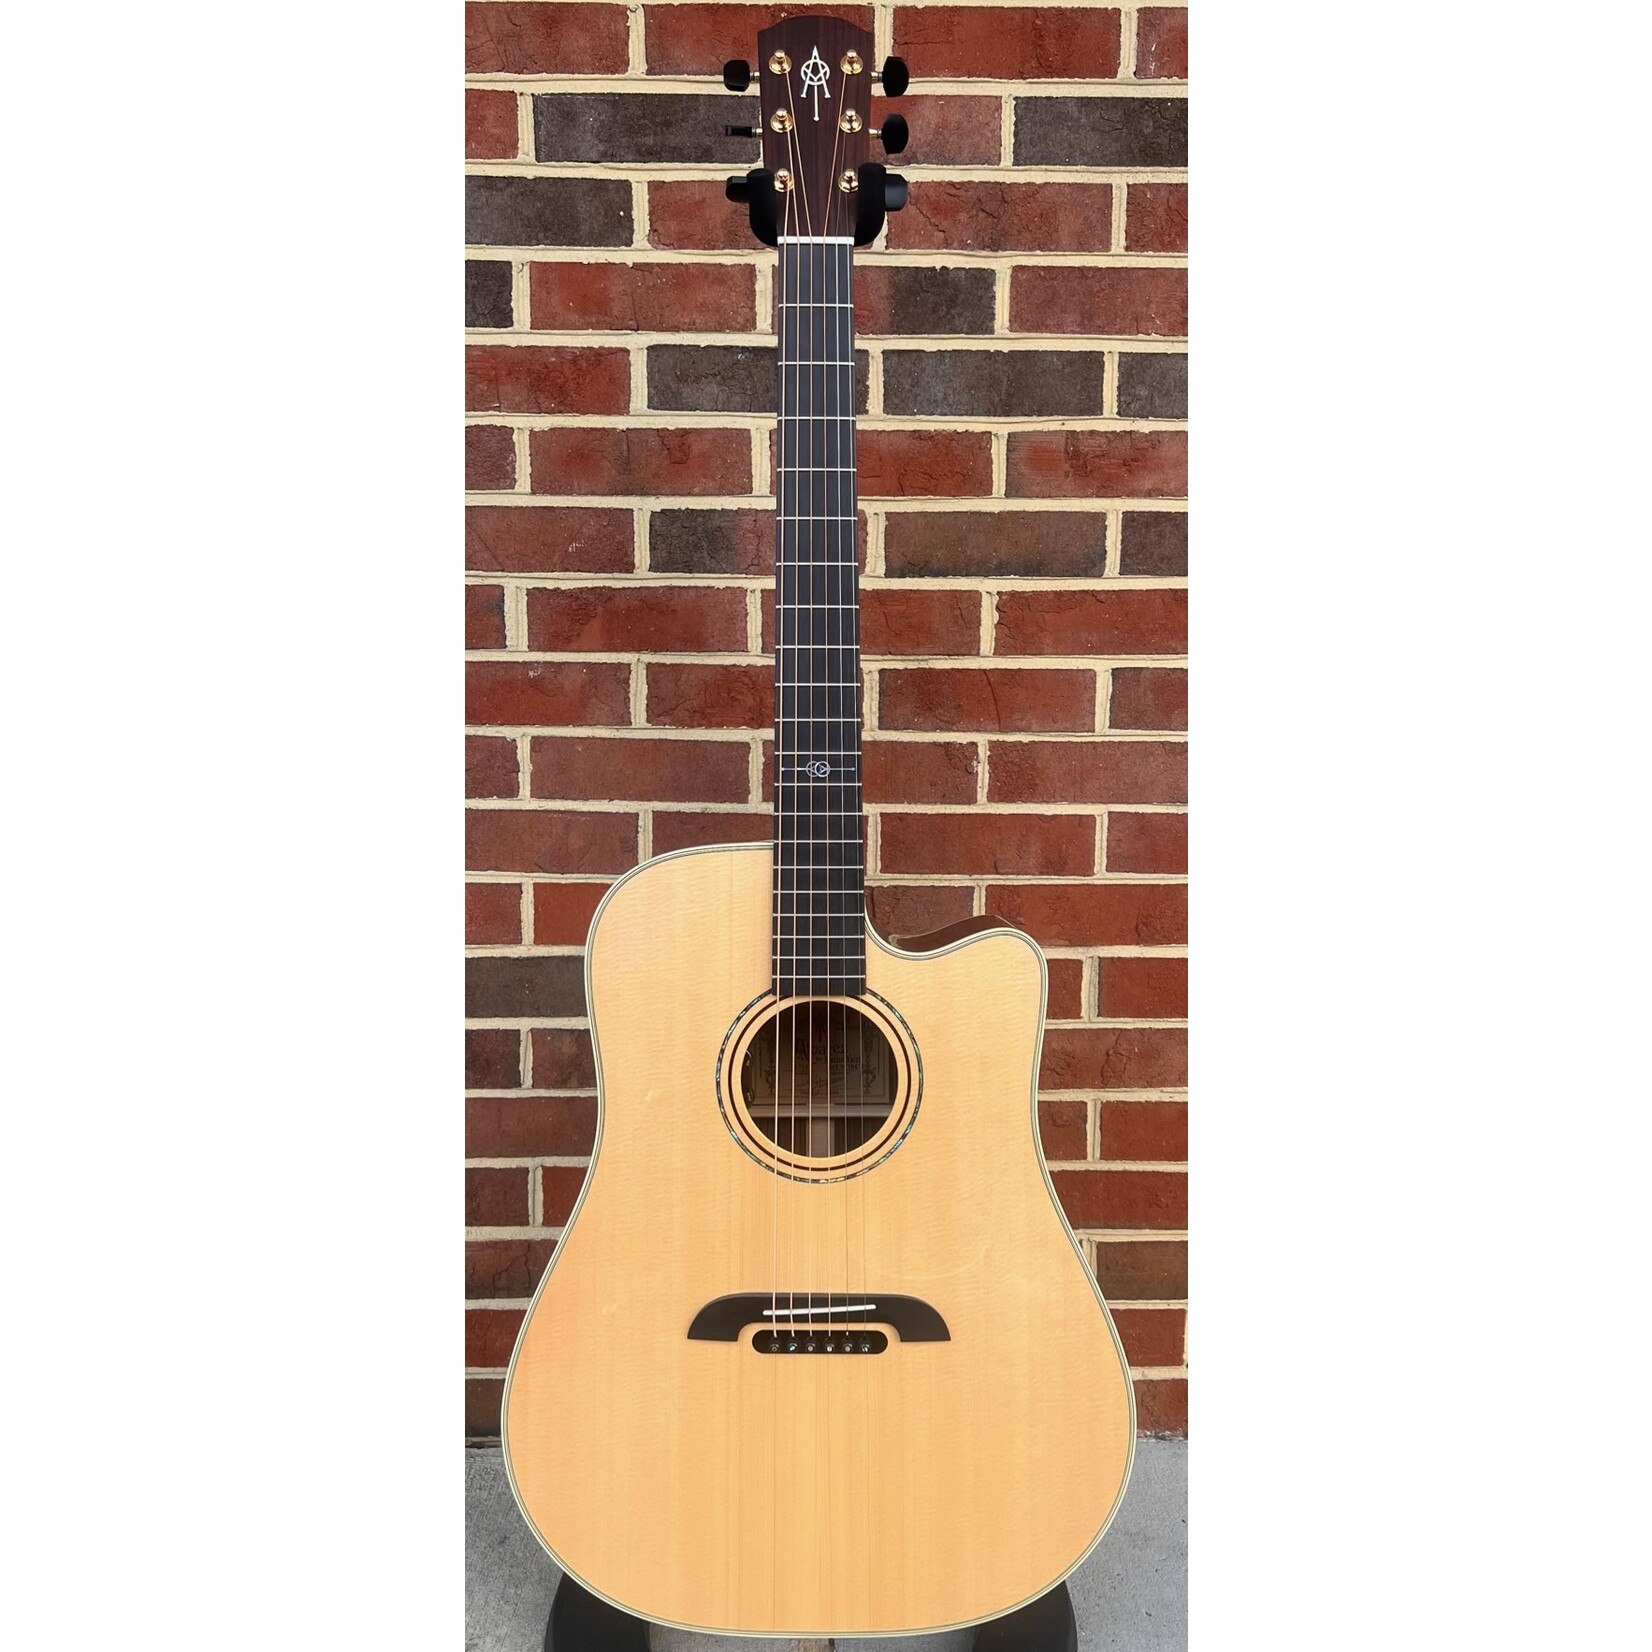 Alvarez Alvarez Yairi Masterworks DYM70CE, Dreadnought, East Indian Rosewood Back & Sides, AAA Sitka Spruce Top, LR Baggs StagePro EQ and Element Pickup, Hardshell Case